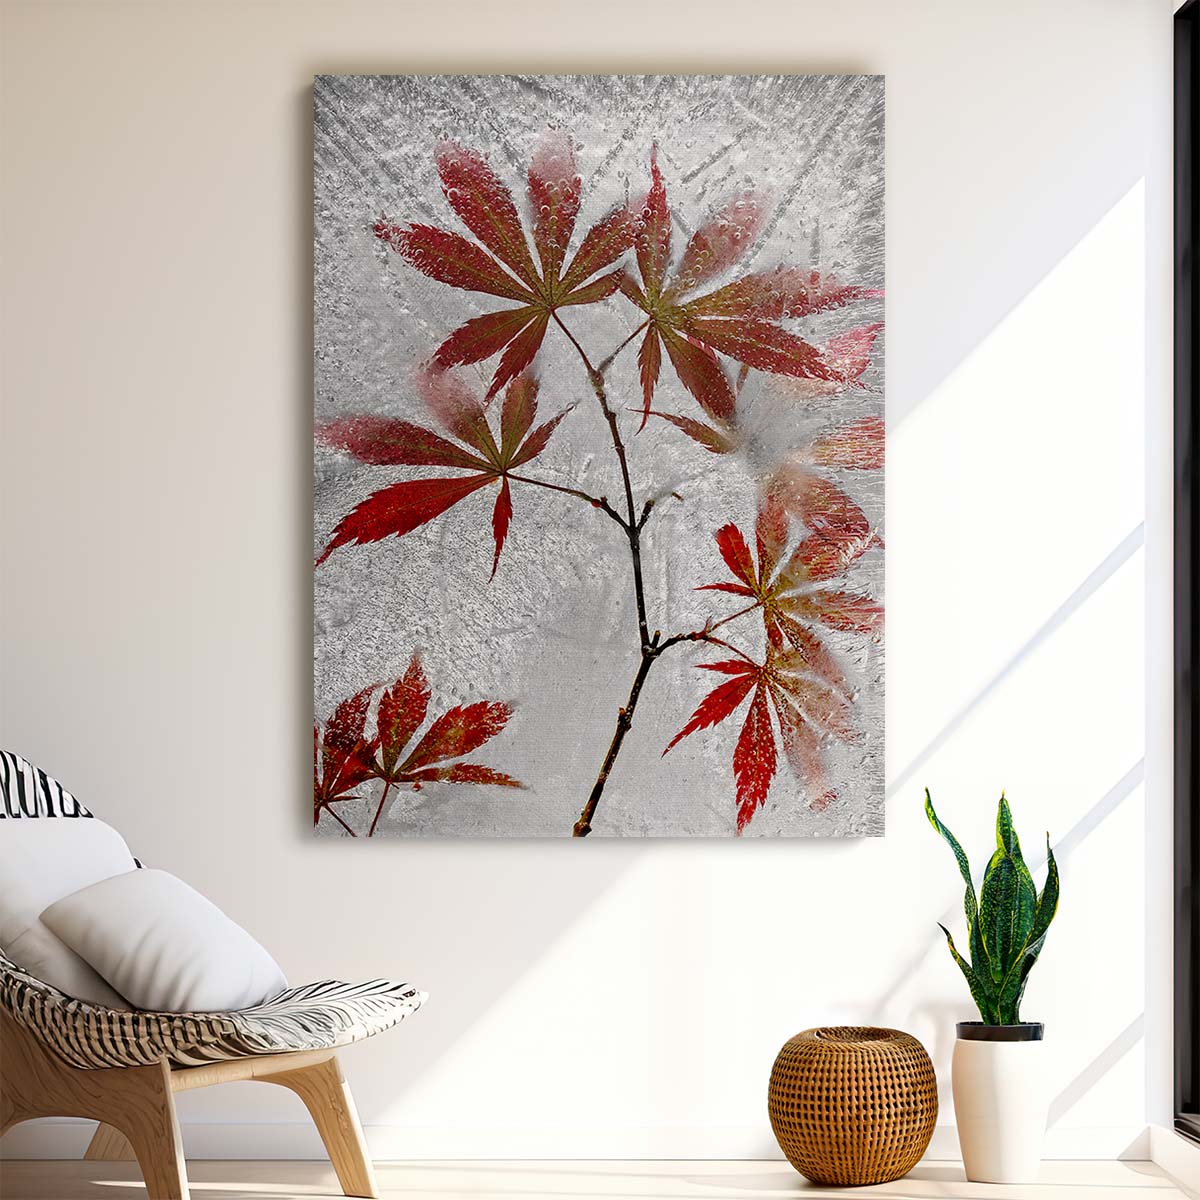 Secundino Losada Red Maple Leaves Icy Winter Still Life Photography by Luxuriance Designs, made in USA